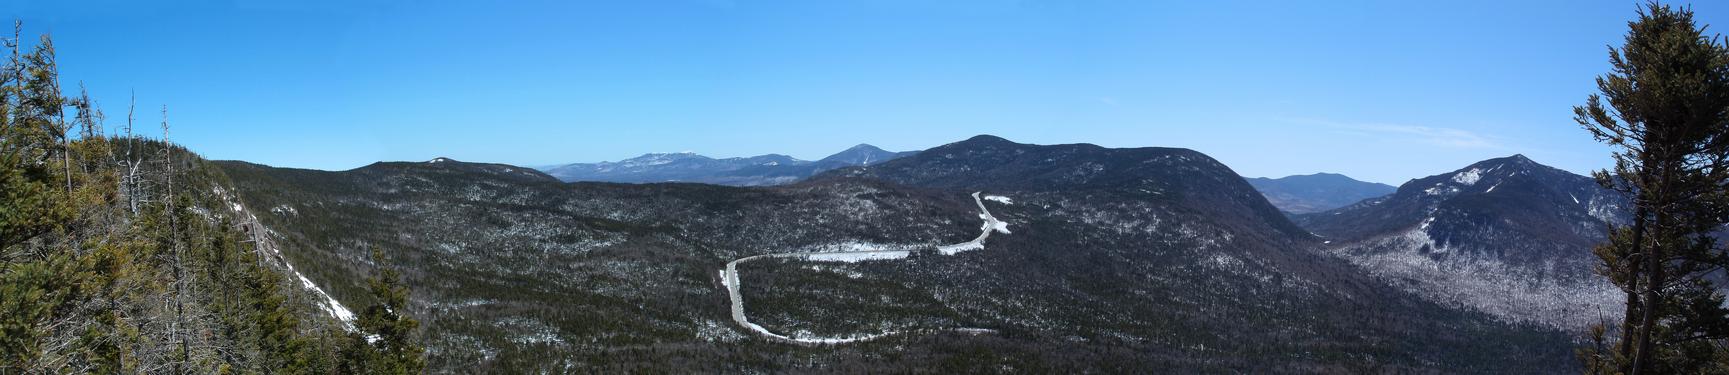 A view of the mountains to the south of the Kancamagus Highway from West Huntington in NH on April 2007